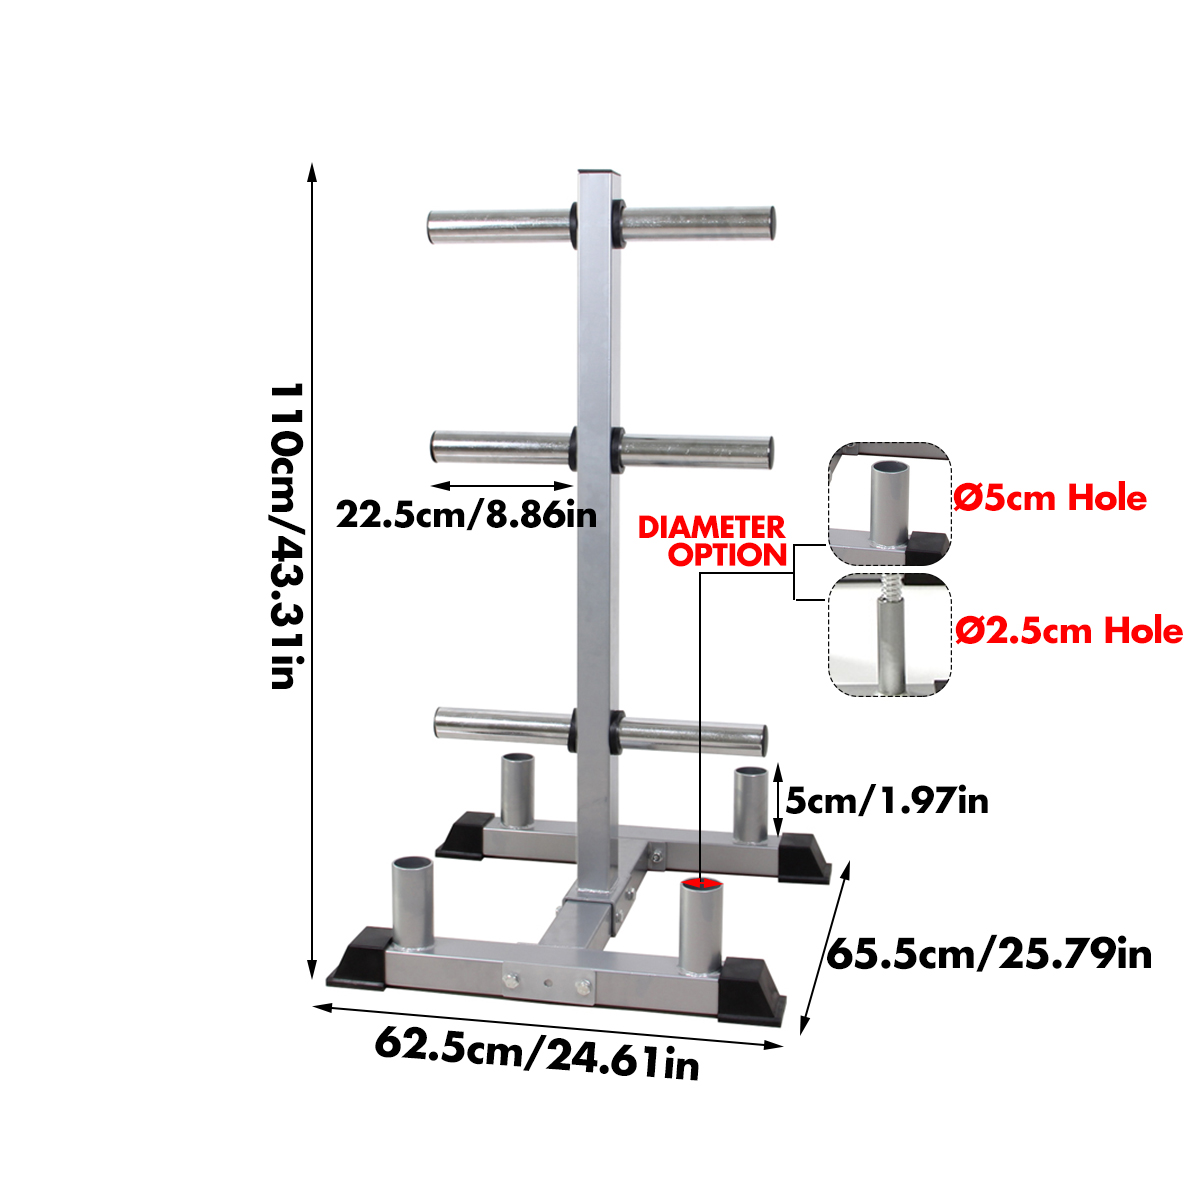 Bumper-Weight-Plate-Storage-Tree-Rack-Olympic-Barbell-Bar-Stand-Holder-Organizer-1766049-3